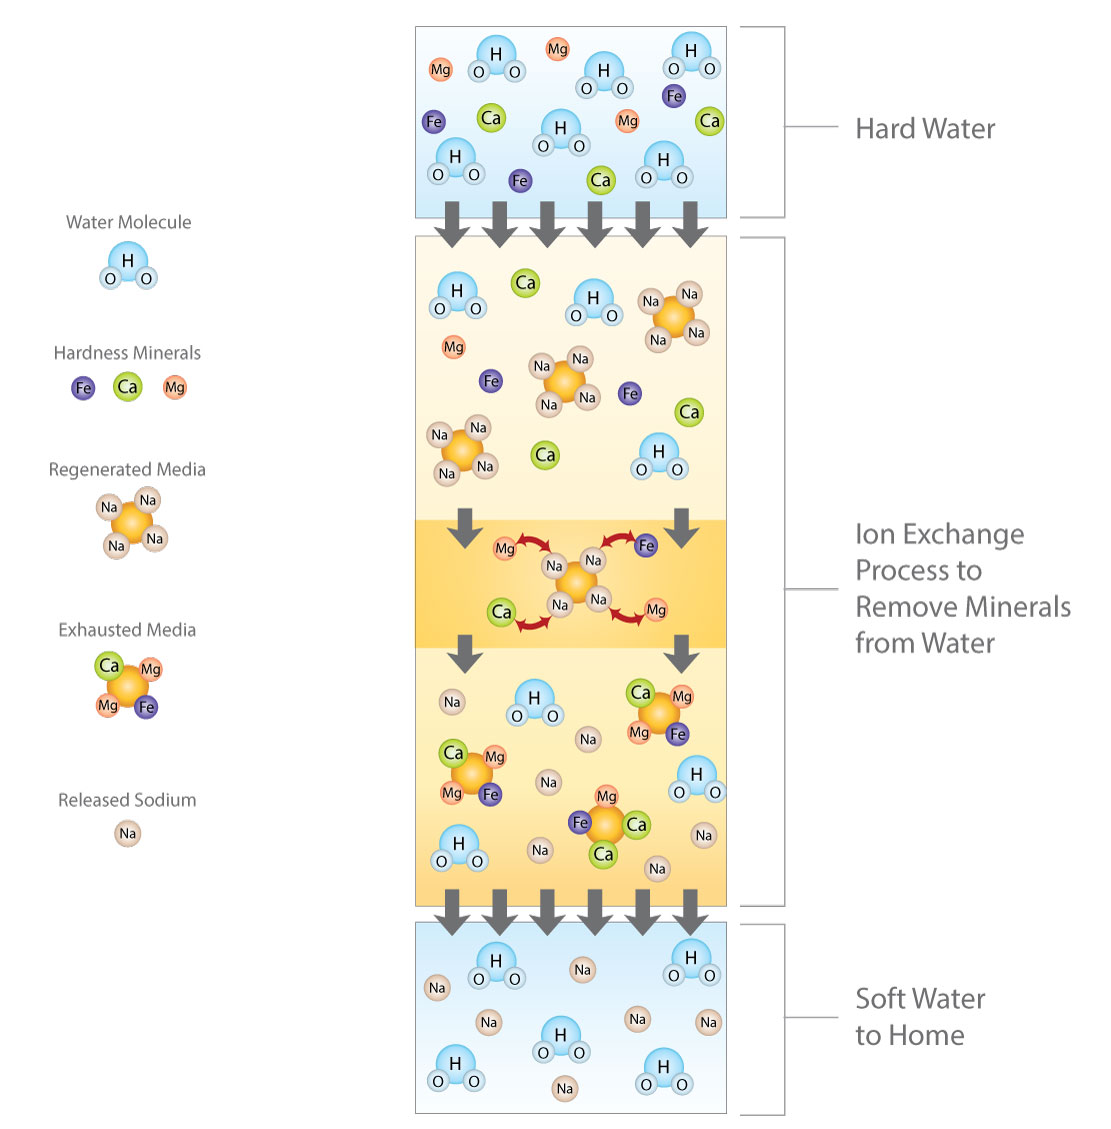 Illustration that shows how hard water becomes soft water through the ion exchange process.